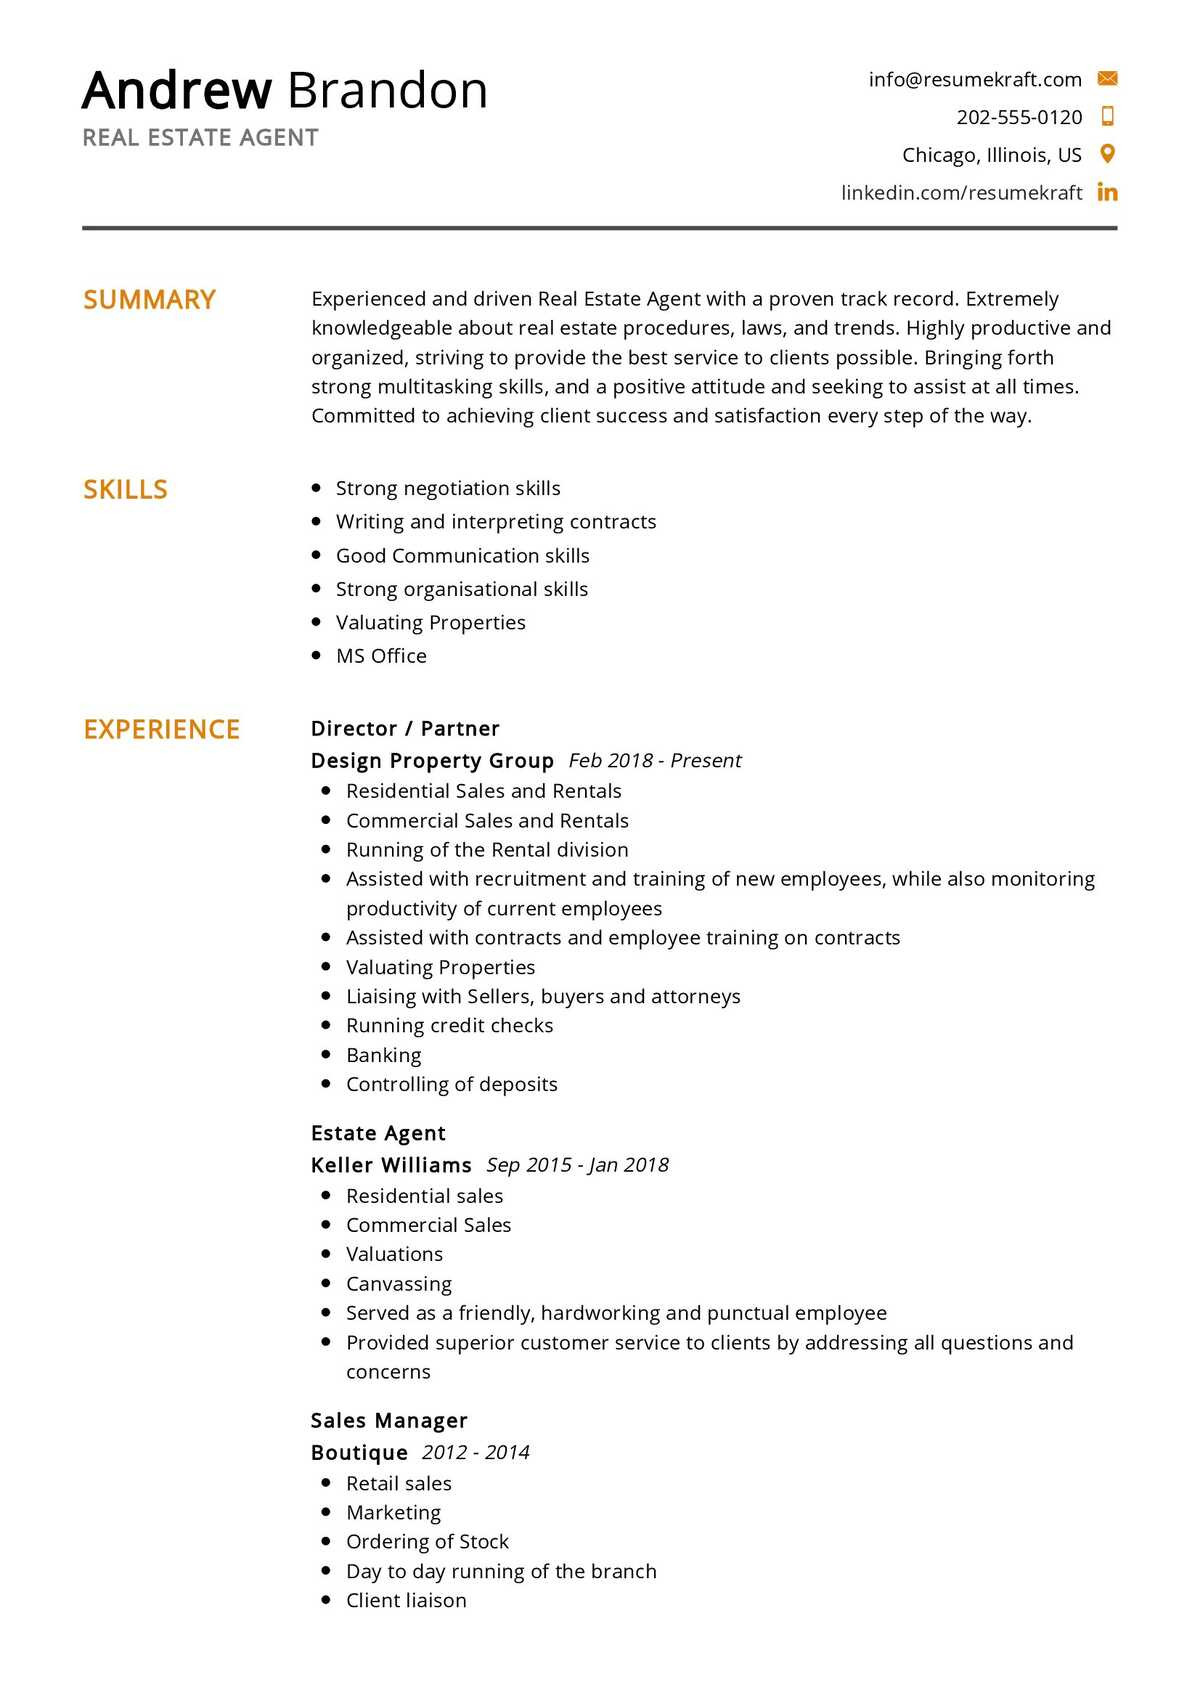 Resume Sample for Real Estate Agent with Experience Real Estate Agent Resume Sample 2021 Writing Tips – Resumekraft